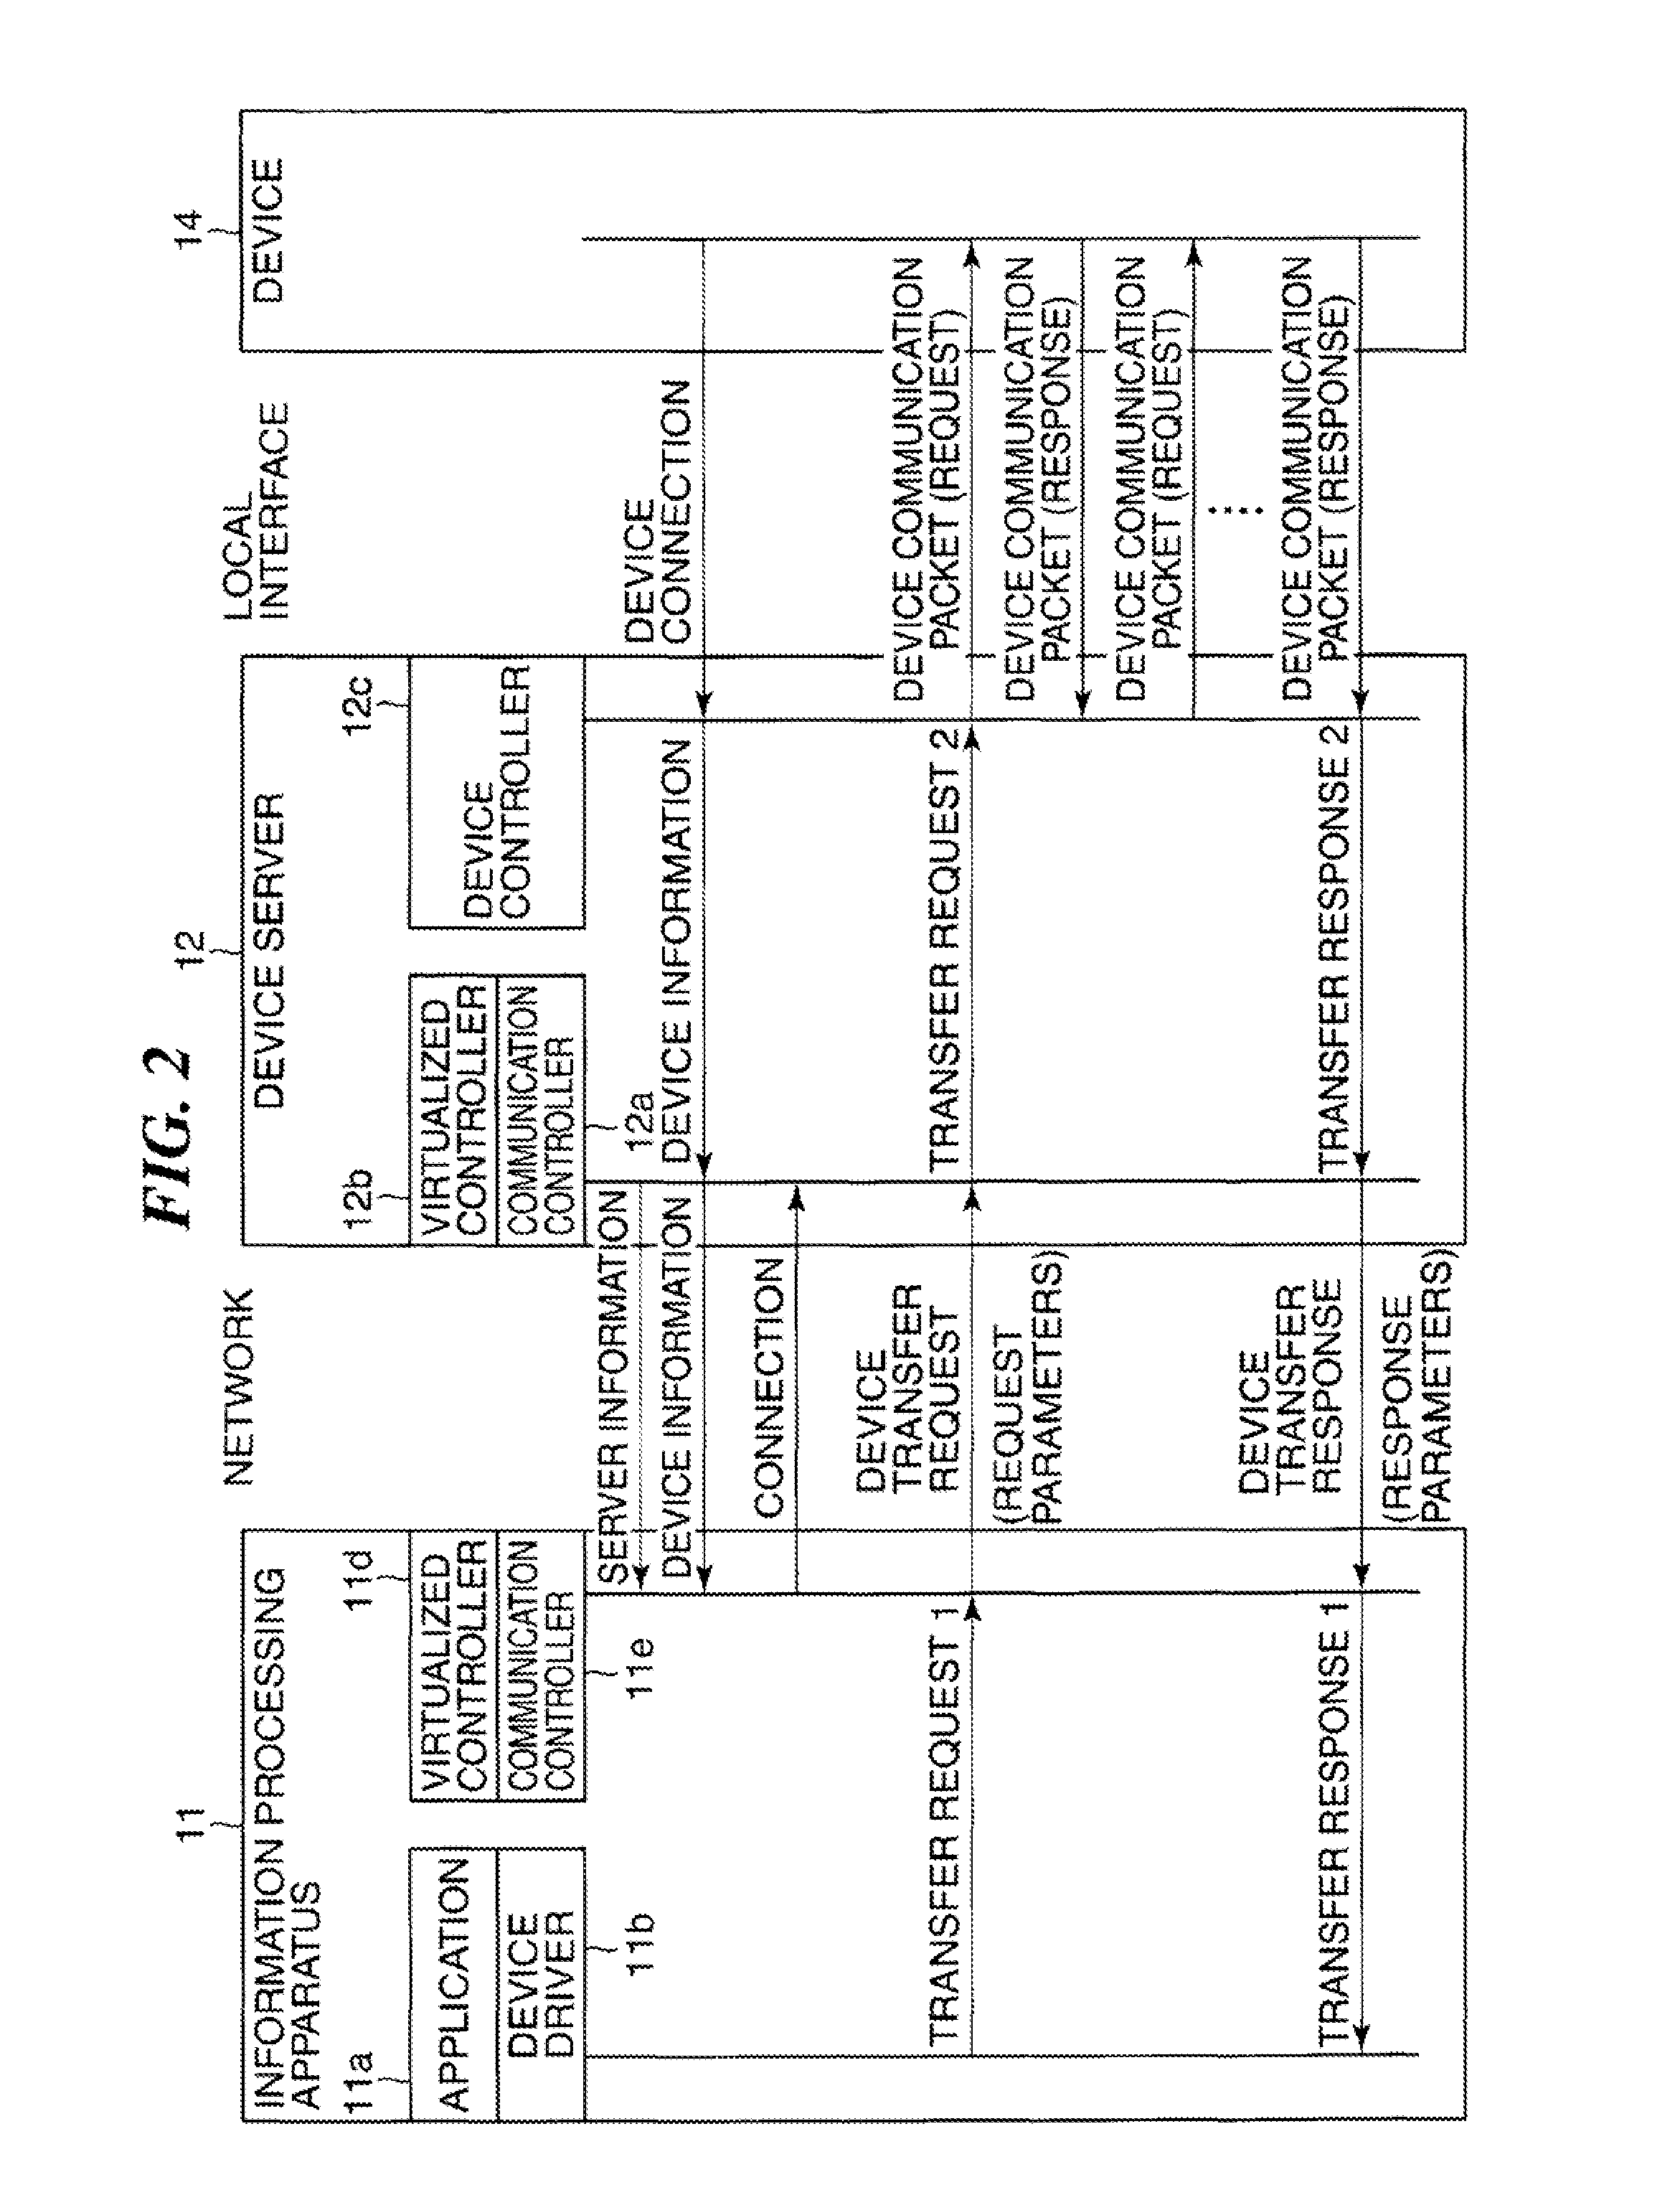 Information processing apparatus that controls device via network and method of controlling the apparatus, device control apparatus and method of controlling the apparatus, as well as device control system